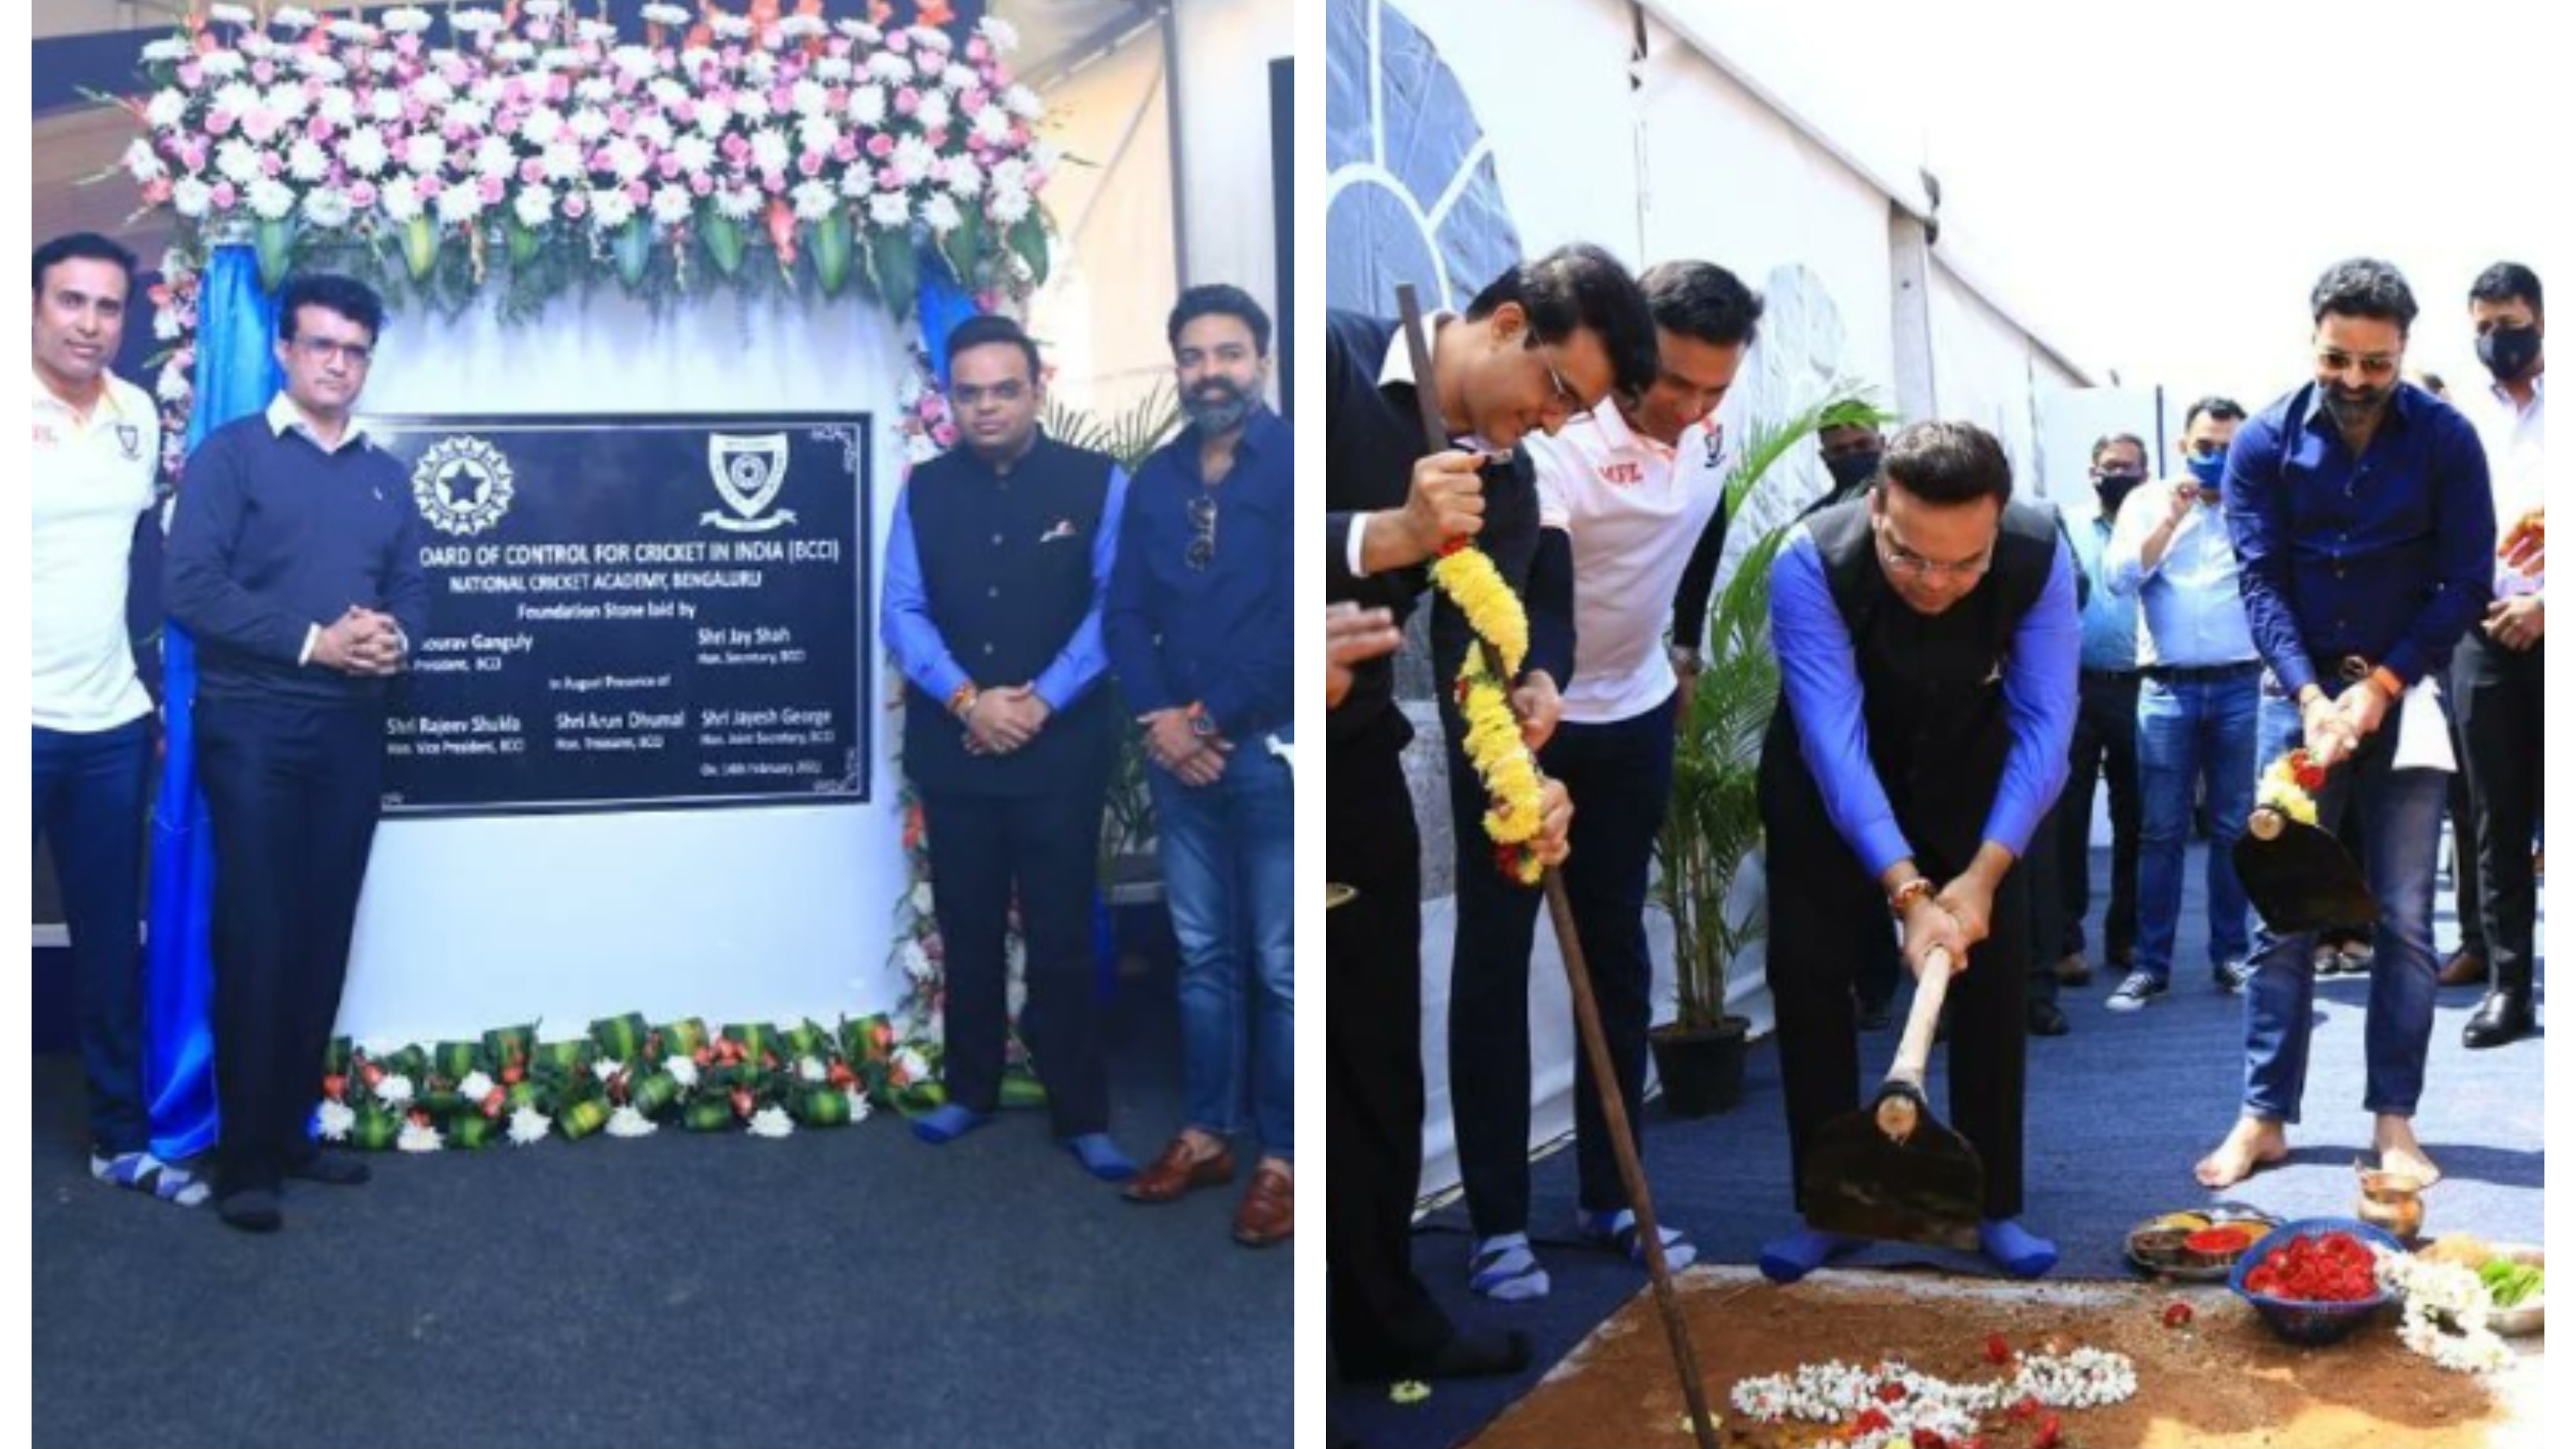 Sourav Ganguly, Jay Shah lay the foundation stone for new NCA in Bangalore